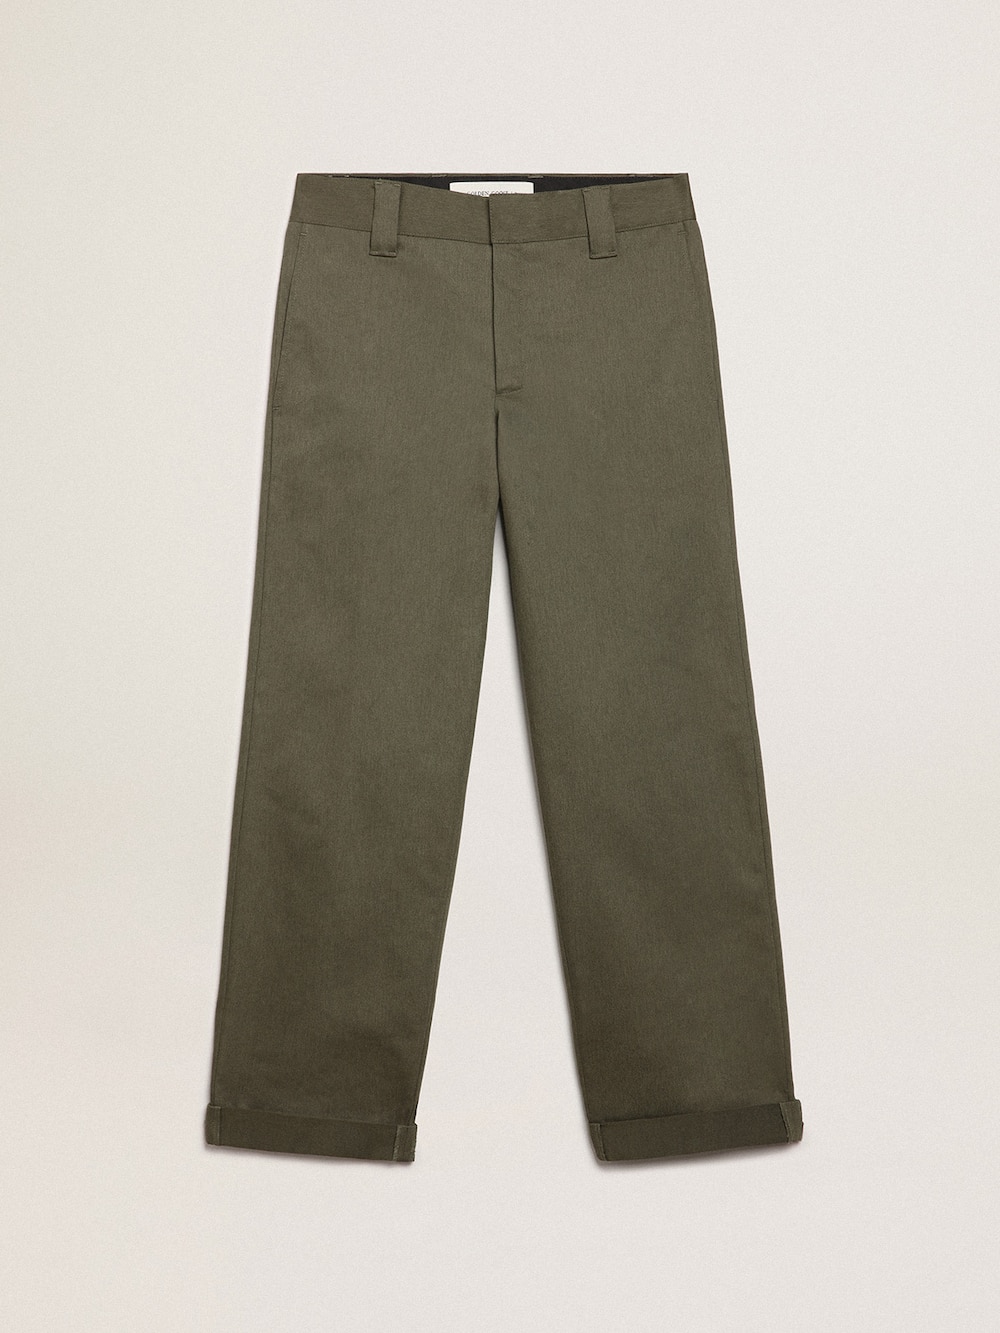 Golden Goose - Pantalone chino Golden Collection color verde militare in 